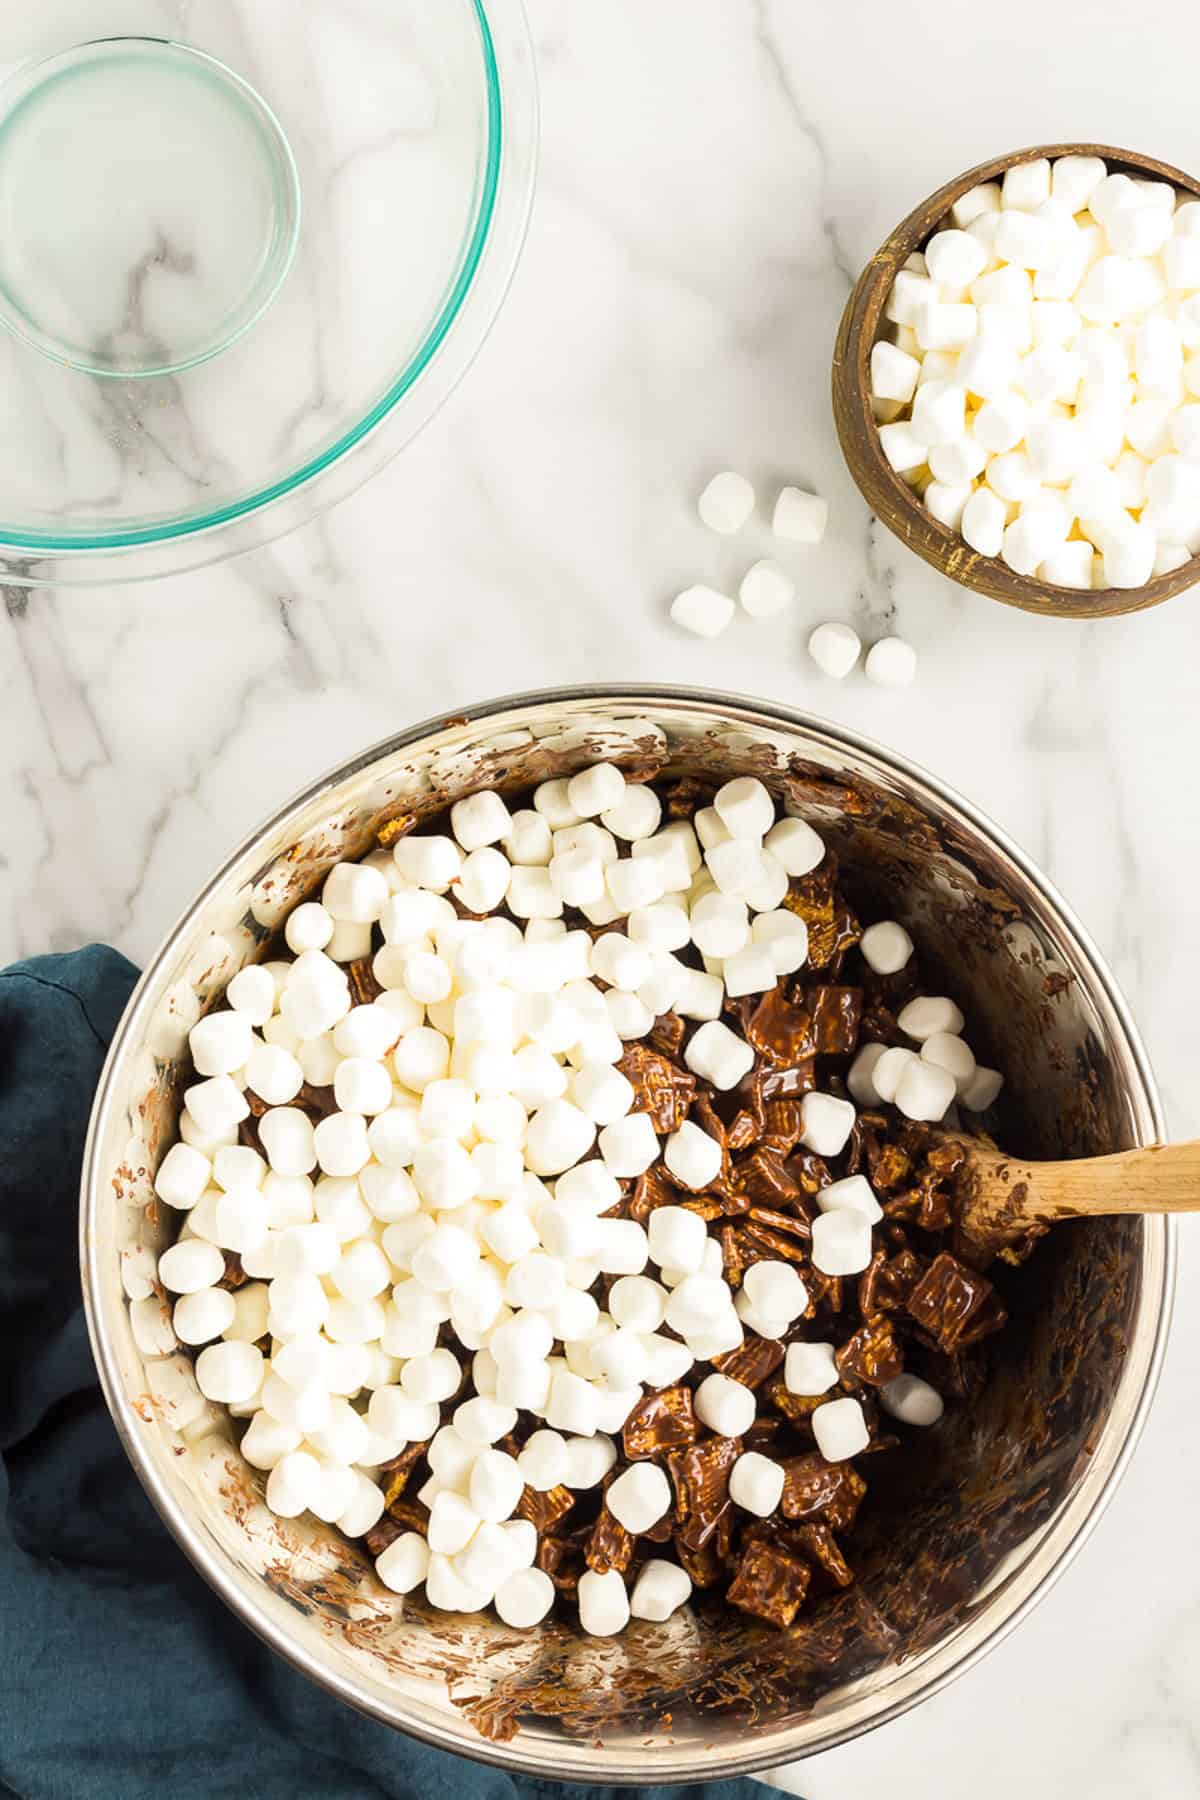 Add in the Marshmallows and mix together.